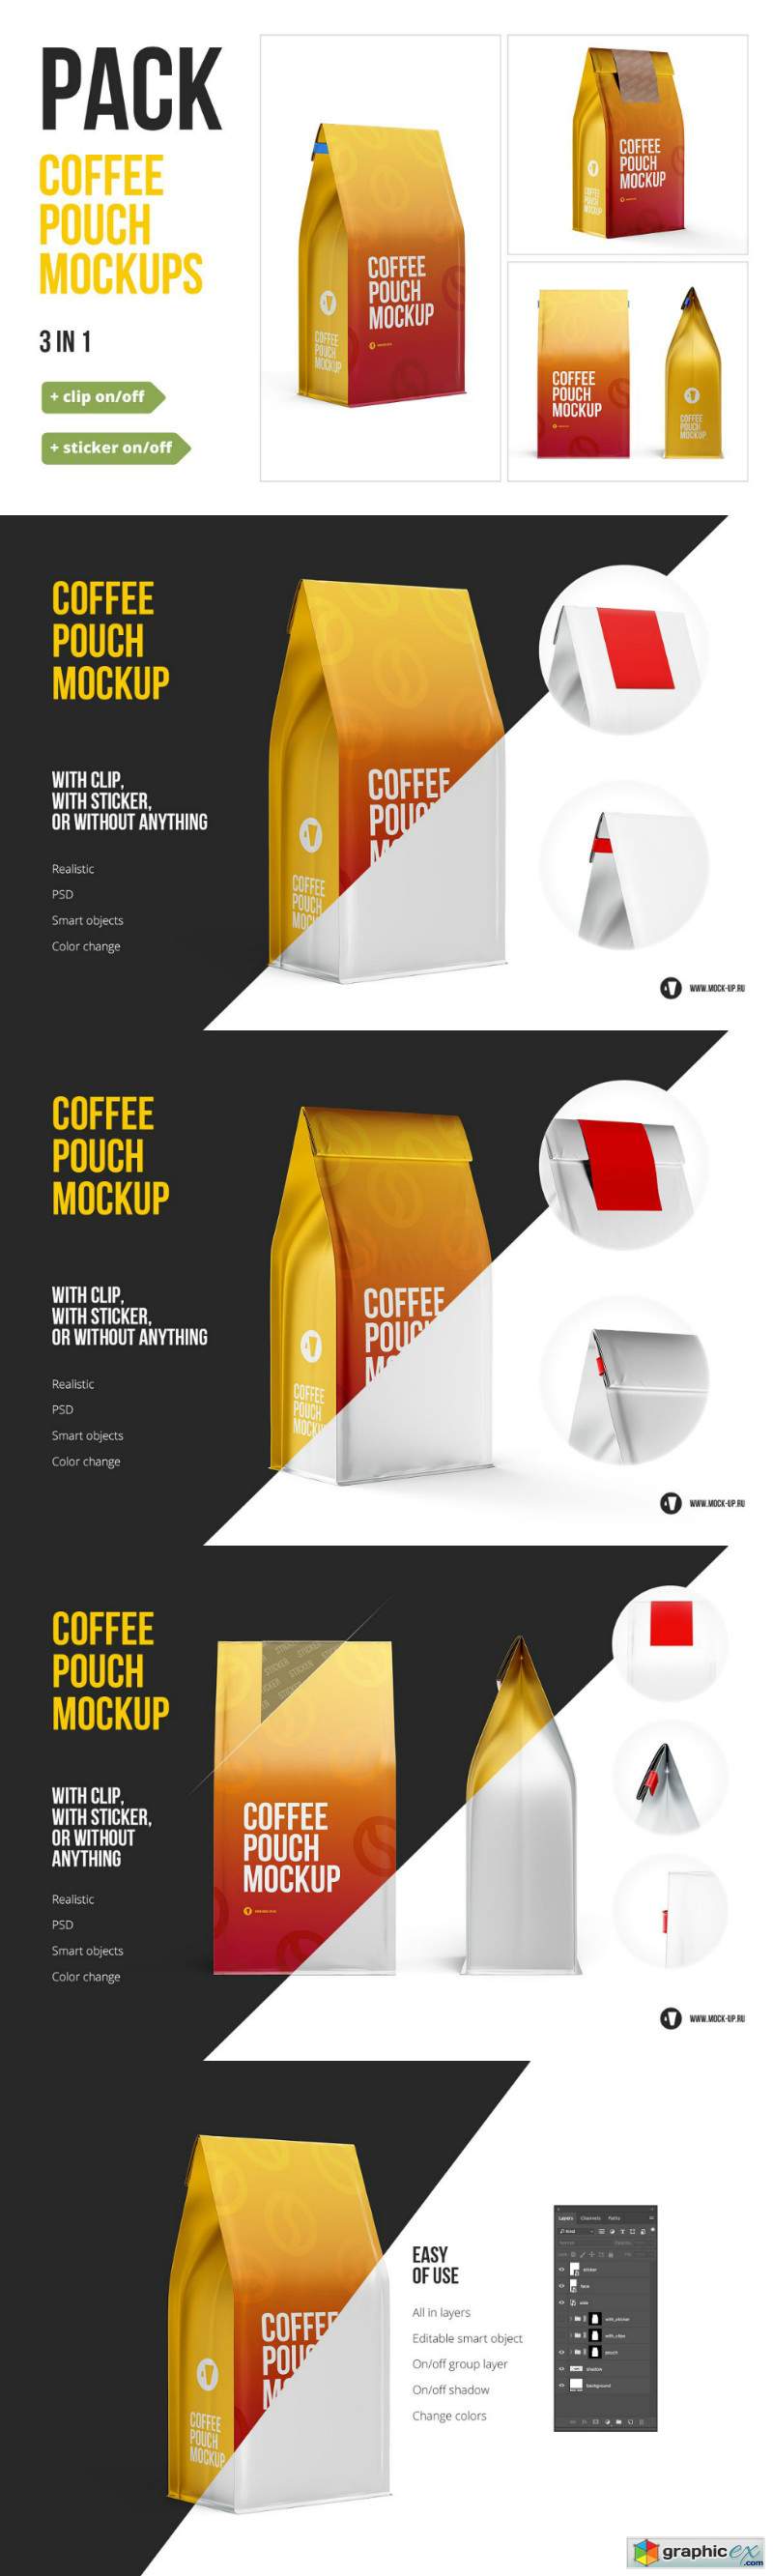 Coffee Pouch Mockup 3 in 1 Pack